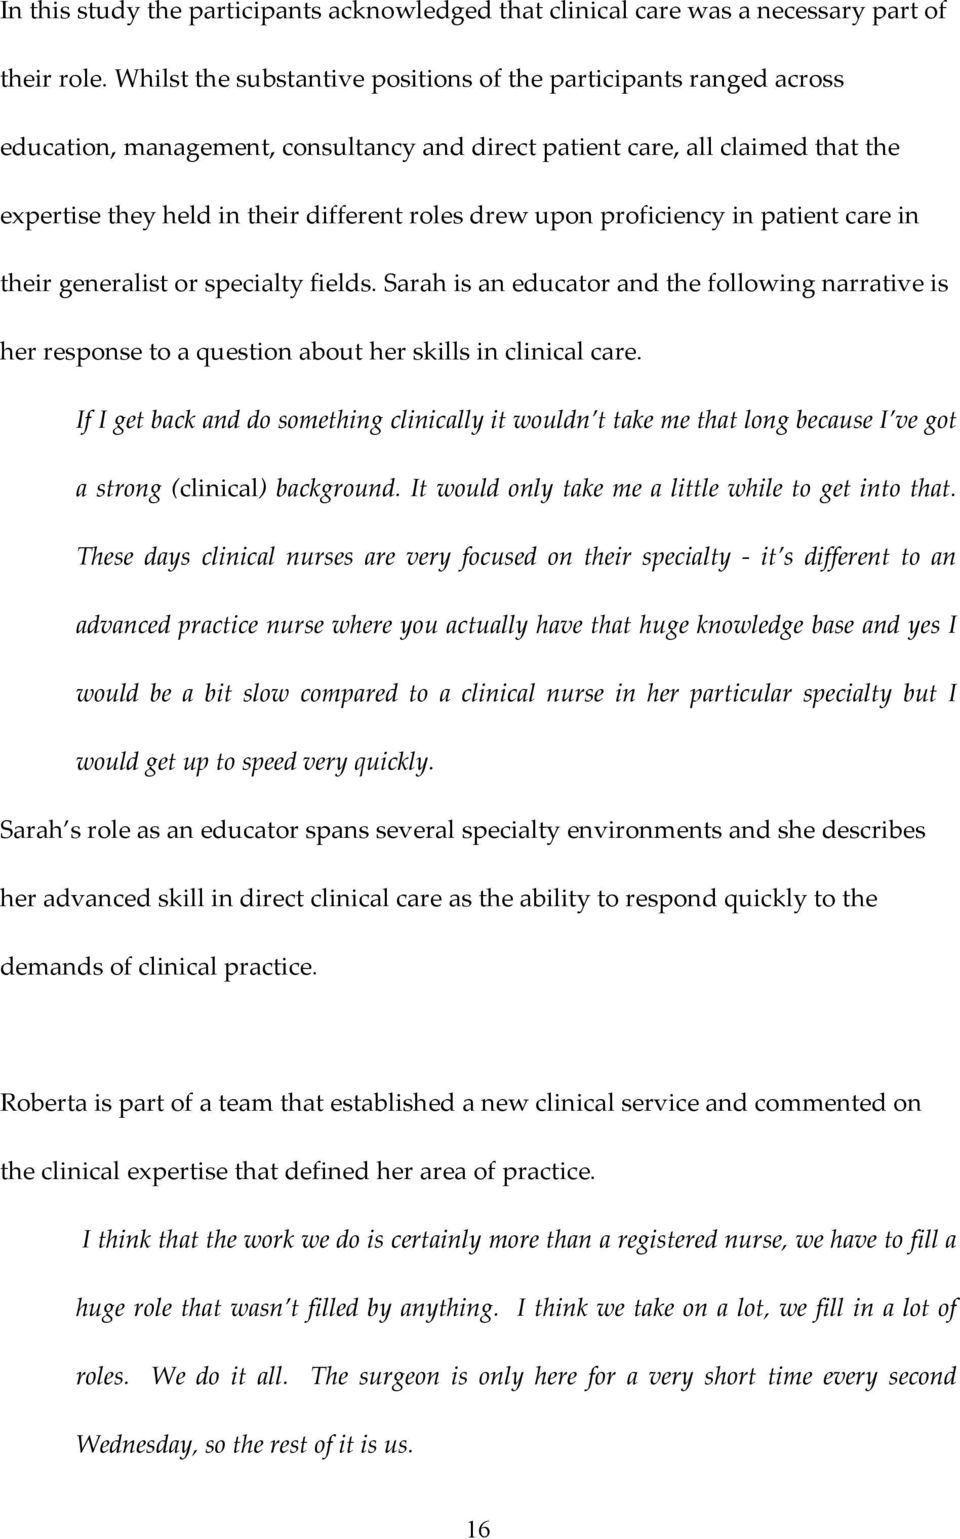 upon proficiency in patient care in their generalist or specialty fields. Sarah is an educator and the following narrative is her response to a question about her skills in clinical care.